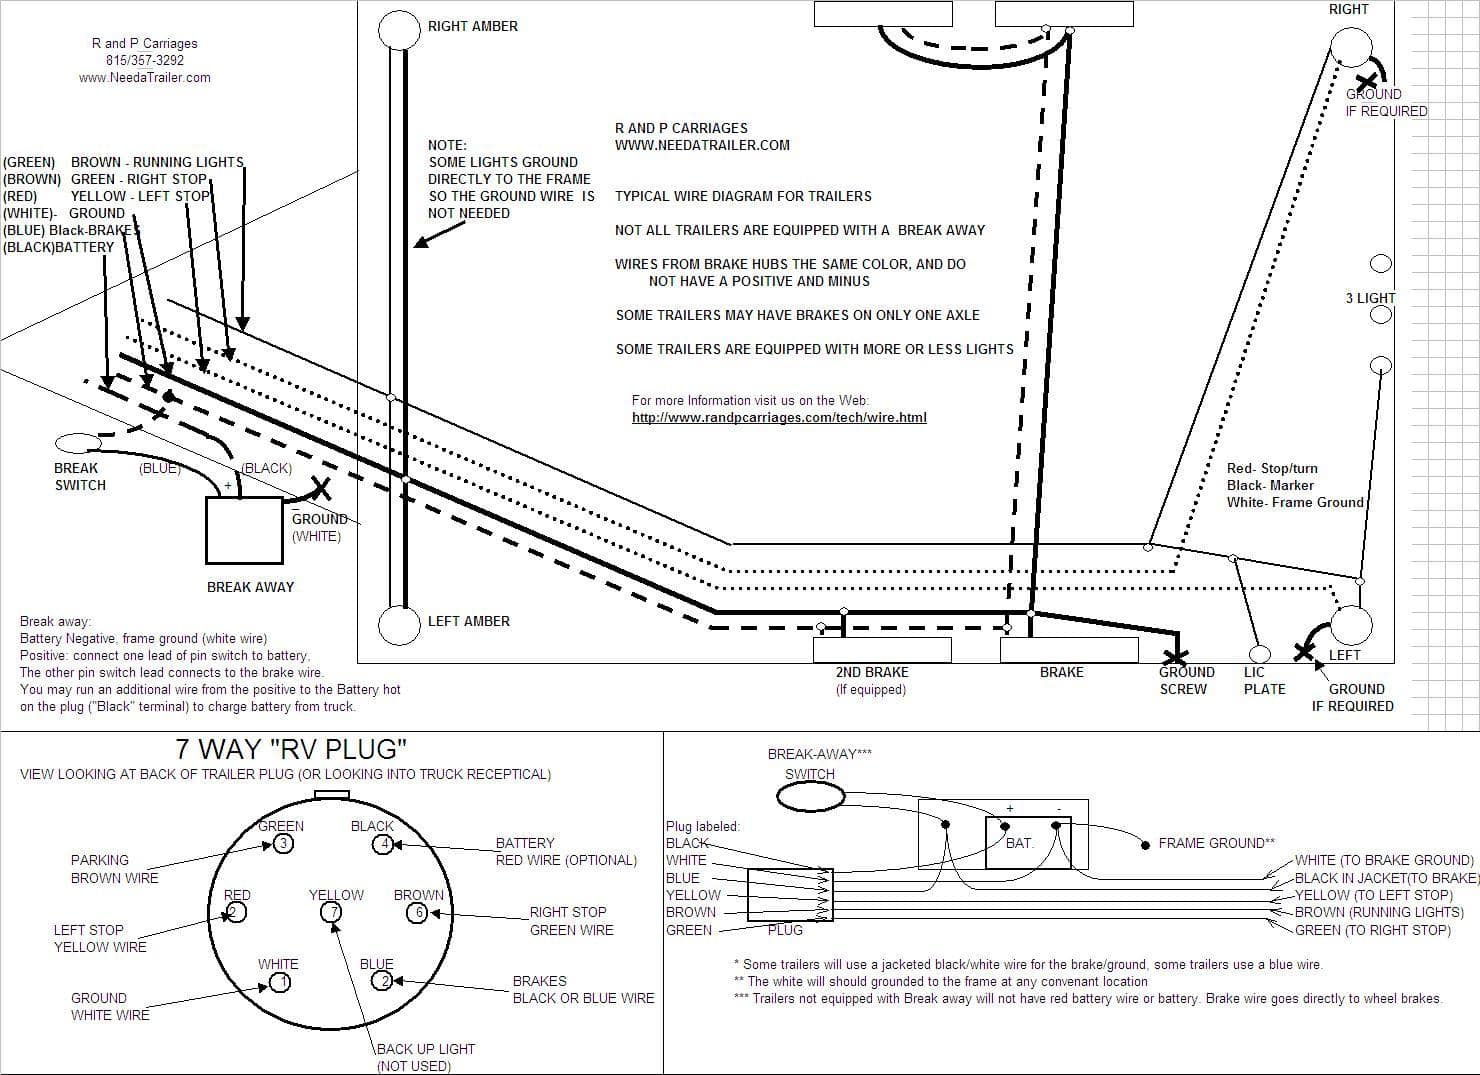 7 Way Plug Information | R And P Carriages | Cargo, Utility, Dump - Electric Trailer Brake Wiring Diagram